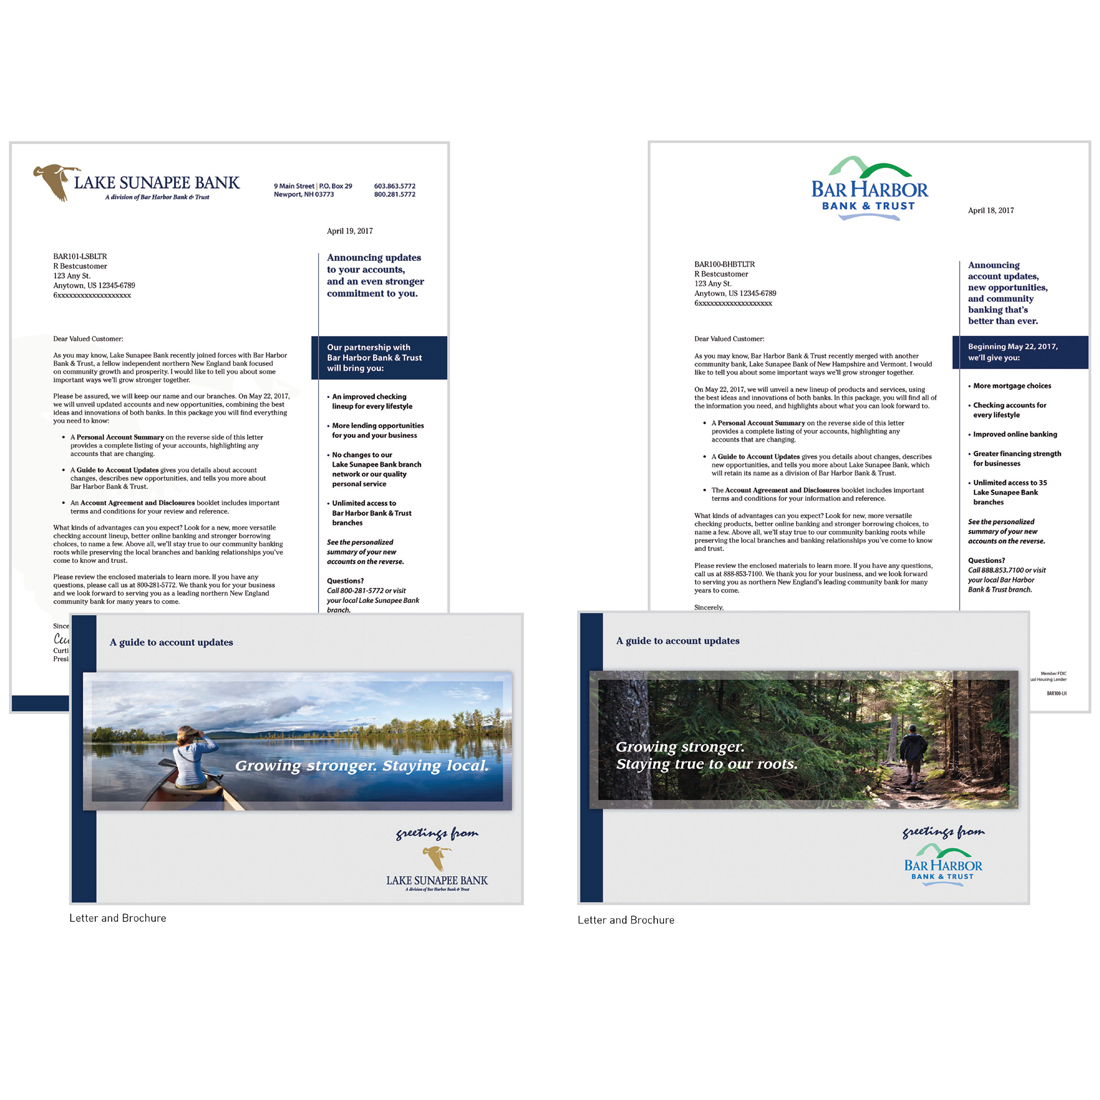 Lake Sunapee Bank letter and brochure next to Bar Harbor Bank letter and brochure